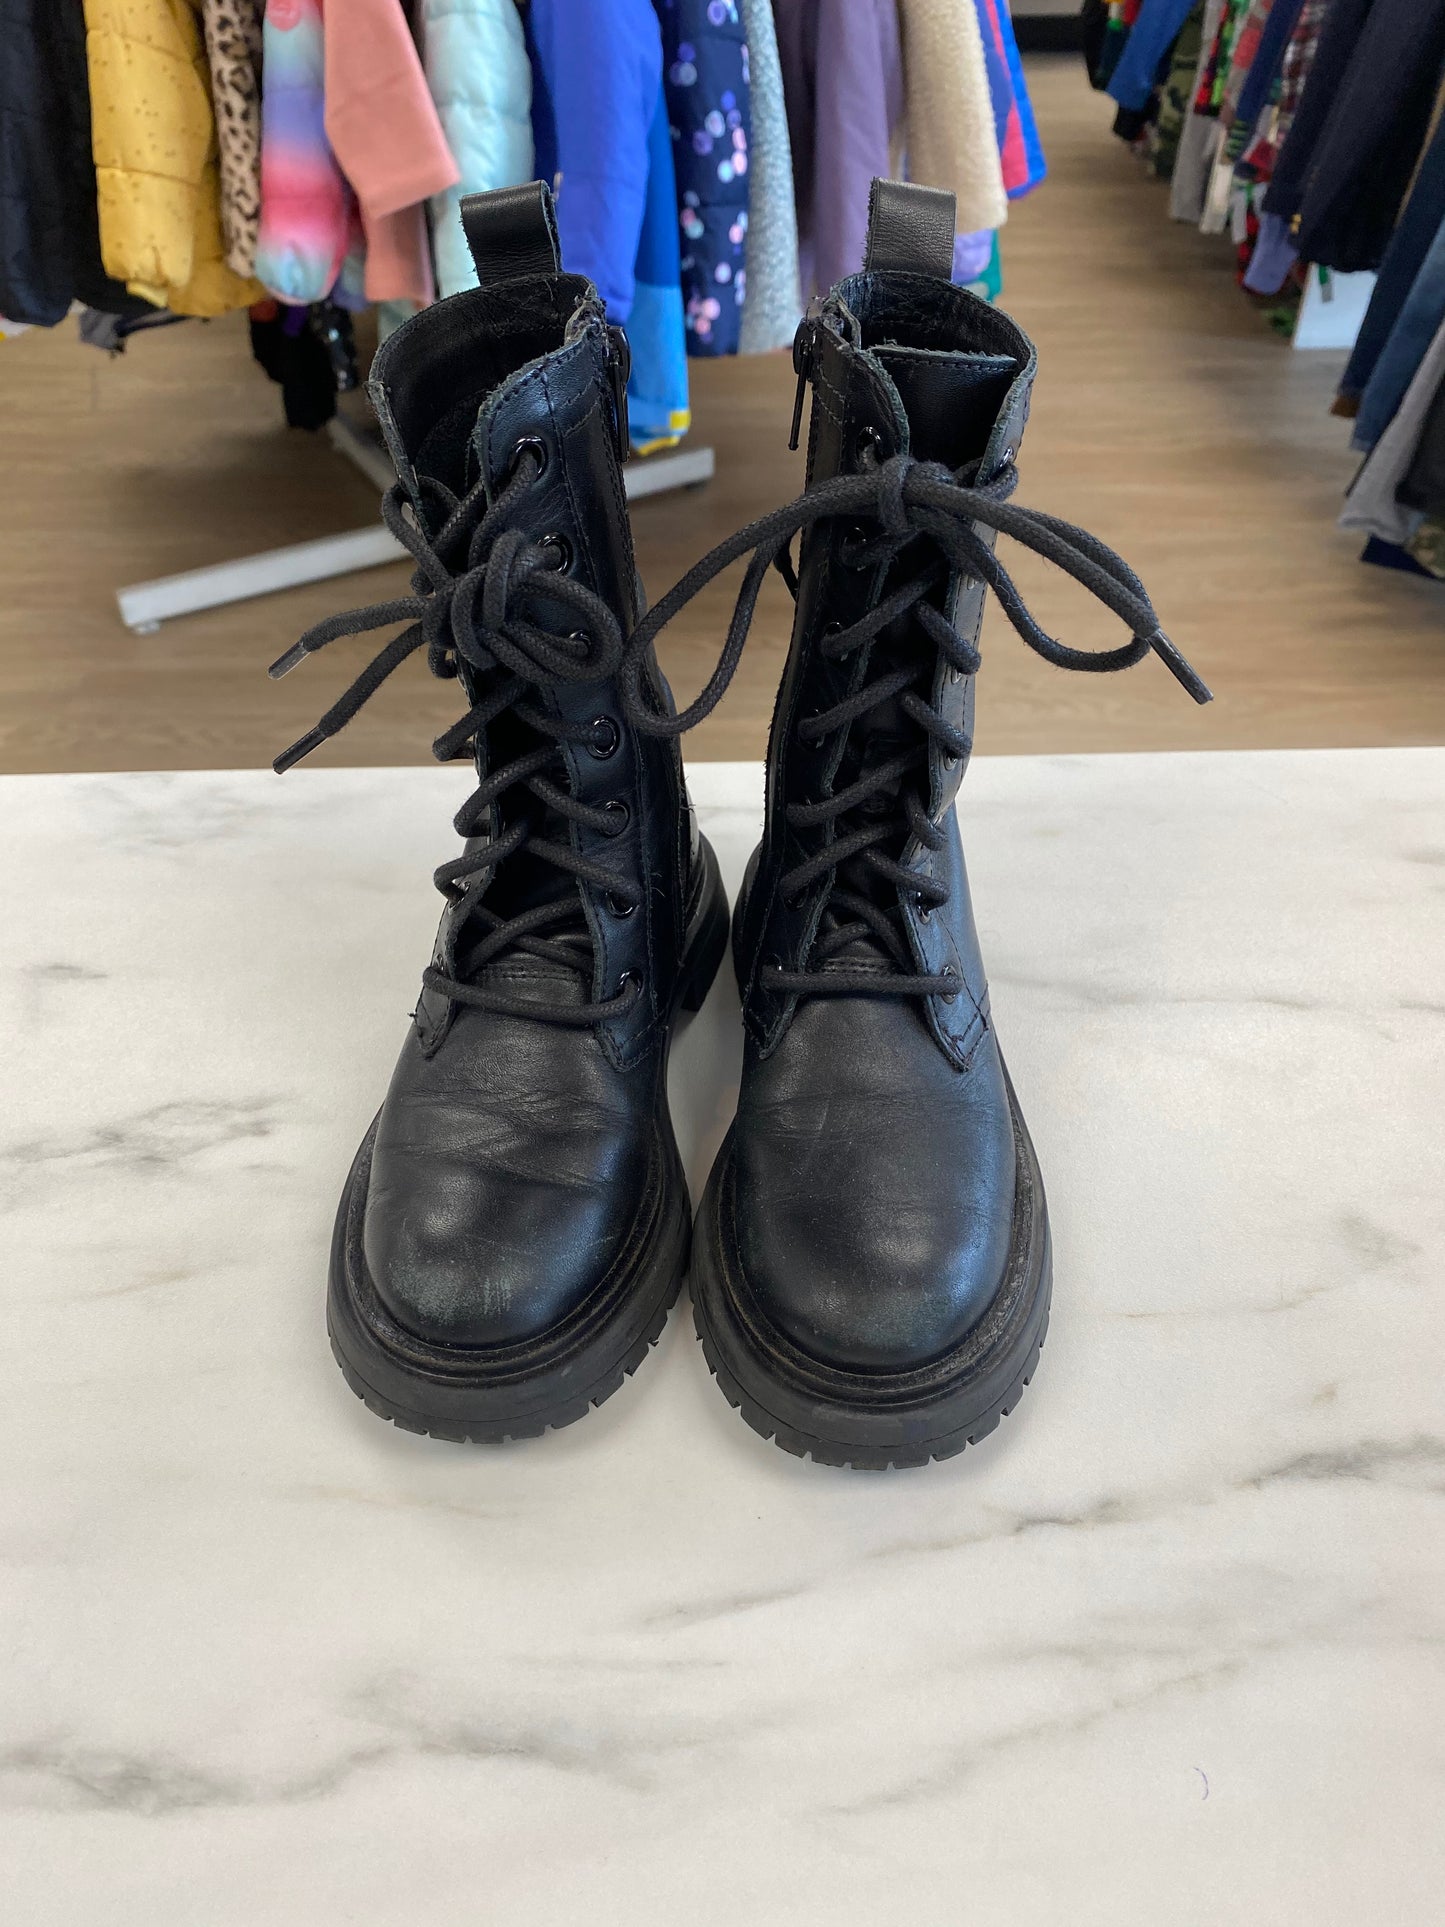 Zara Black lace up Shoes/Boots